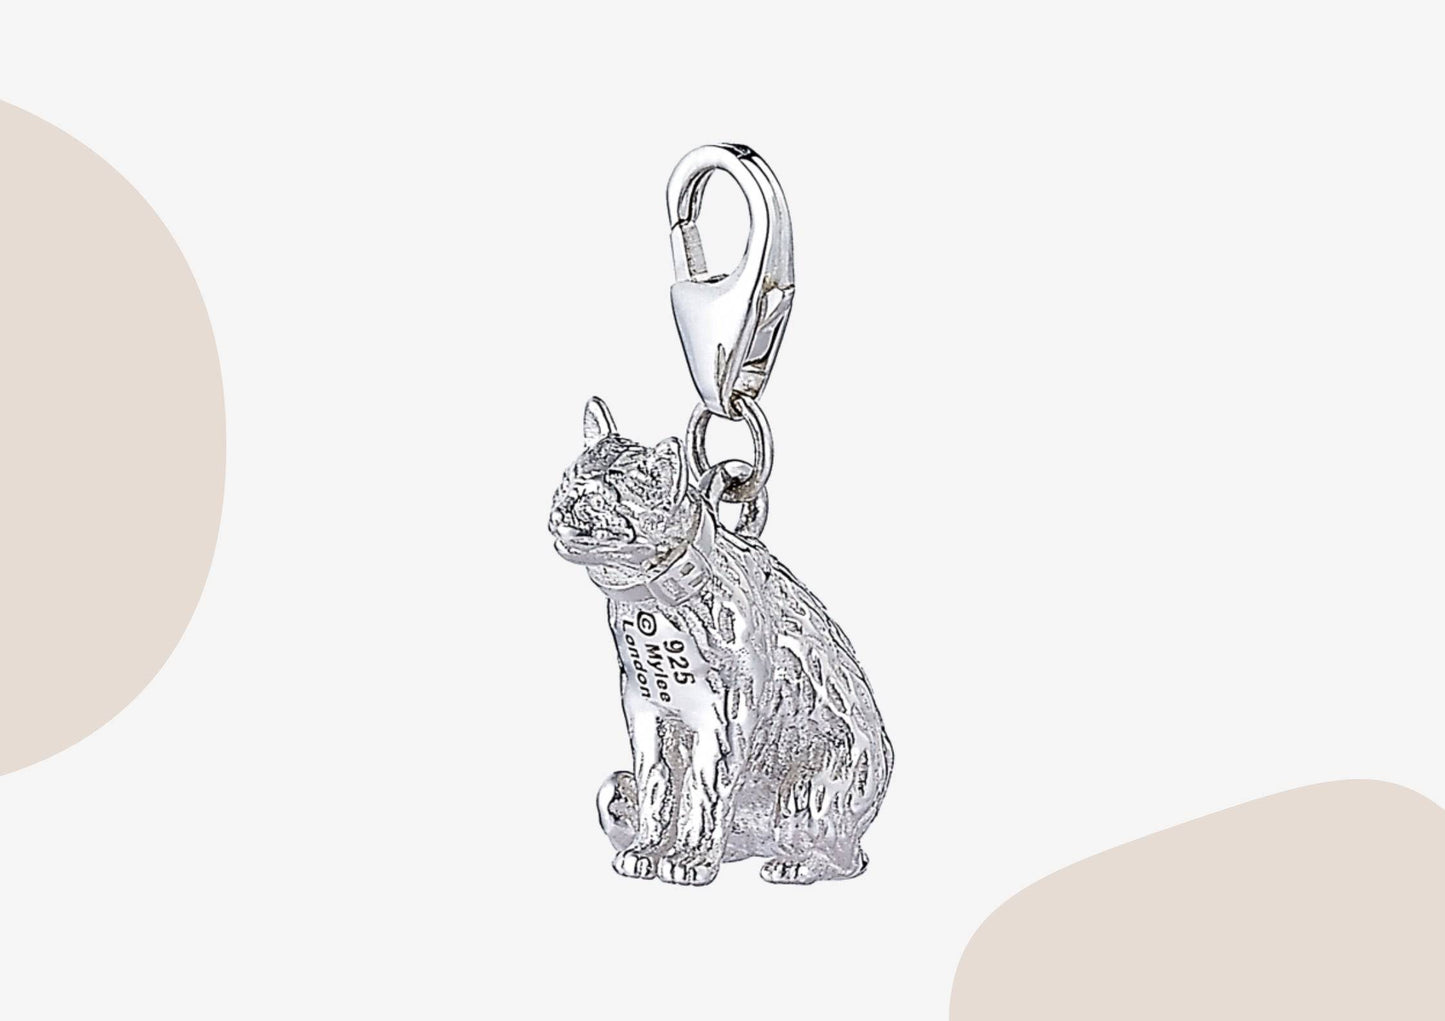 Long-Haired Cat Silver Charm